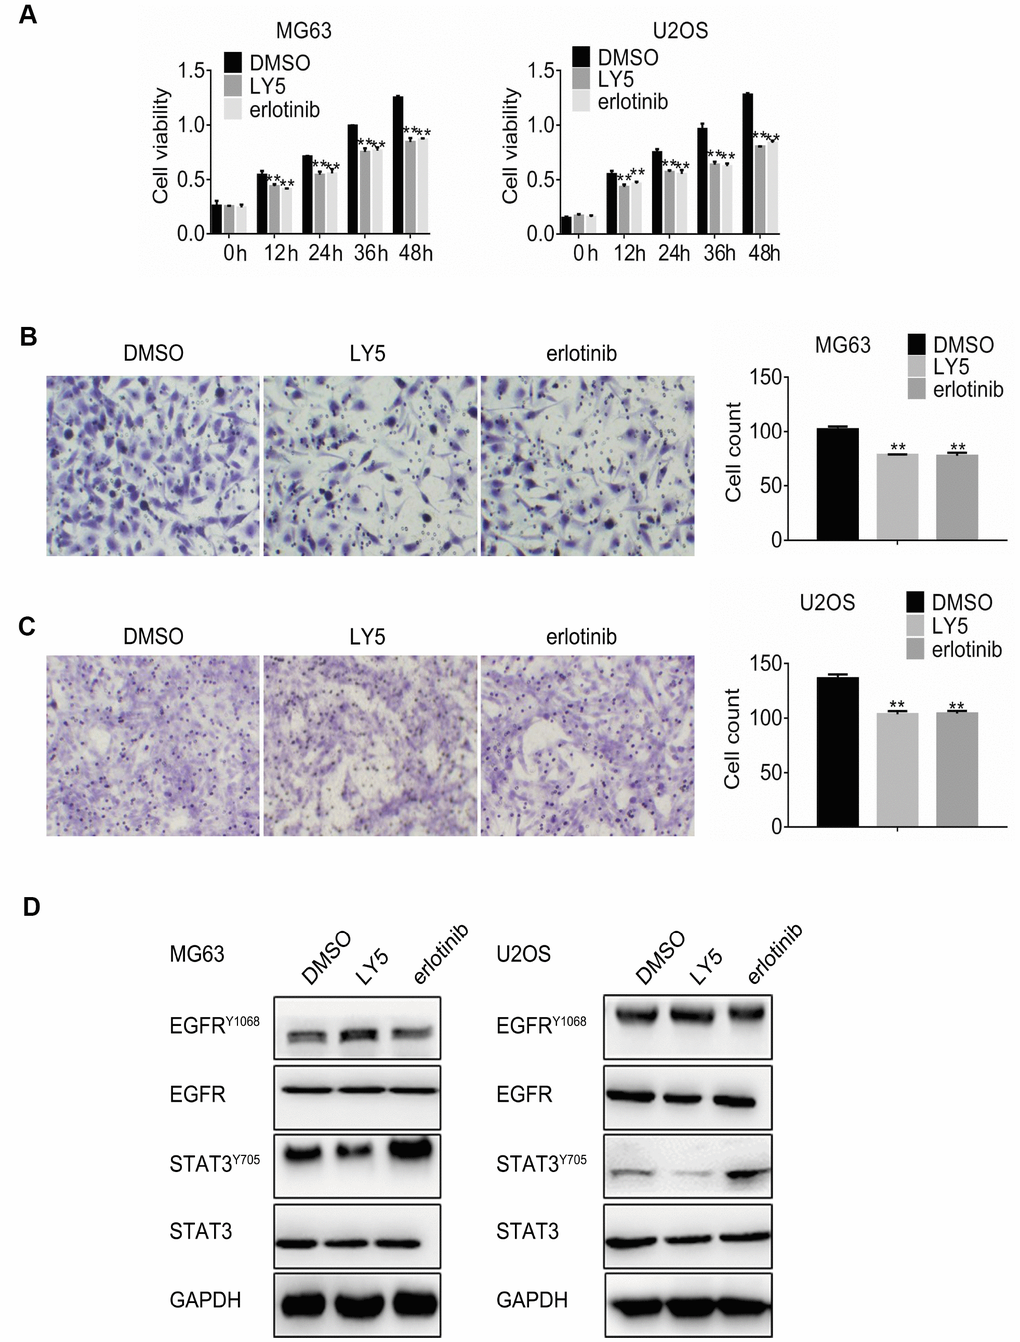 Independent inhibition of STAT3 and EGFR signaling triggers reciprocal feedback activation in osteosarcoma cells. (A) MG63 and U2OS cells were treated with DMSO (vehicle), LY5, or erlotinib, and the MTT assay was performed to determine cell viability at different time points. Cell migration assay results in MG63 (B) and U2OS (C) cells treated with DMSO, LY5, or erlotinib for 24 h. Magnification, 200x. Error bars indicate SD. ** p D). Western blot analysis of phospho-Tyr705 STAT3 and phospho-Tyr1068 EGFR in MG63 and U2OS cells treated with DMSO, LY5, or erlotinib for 24h.